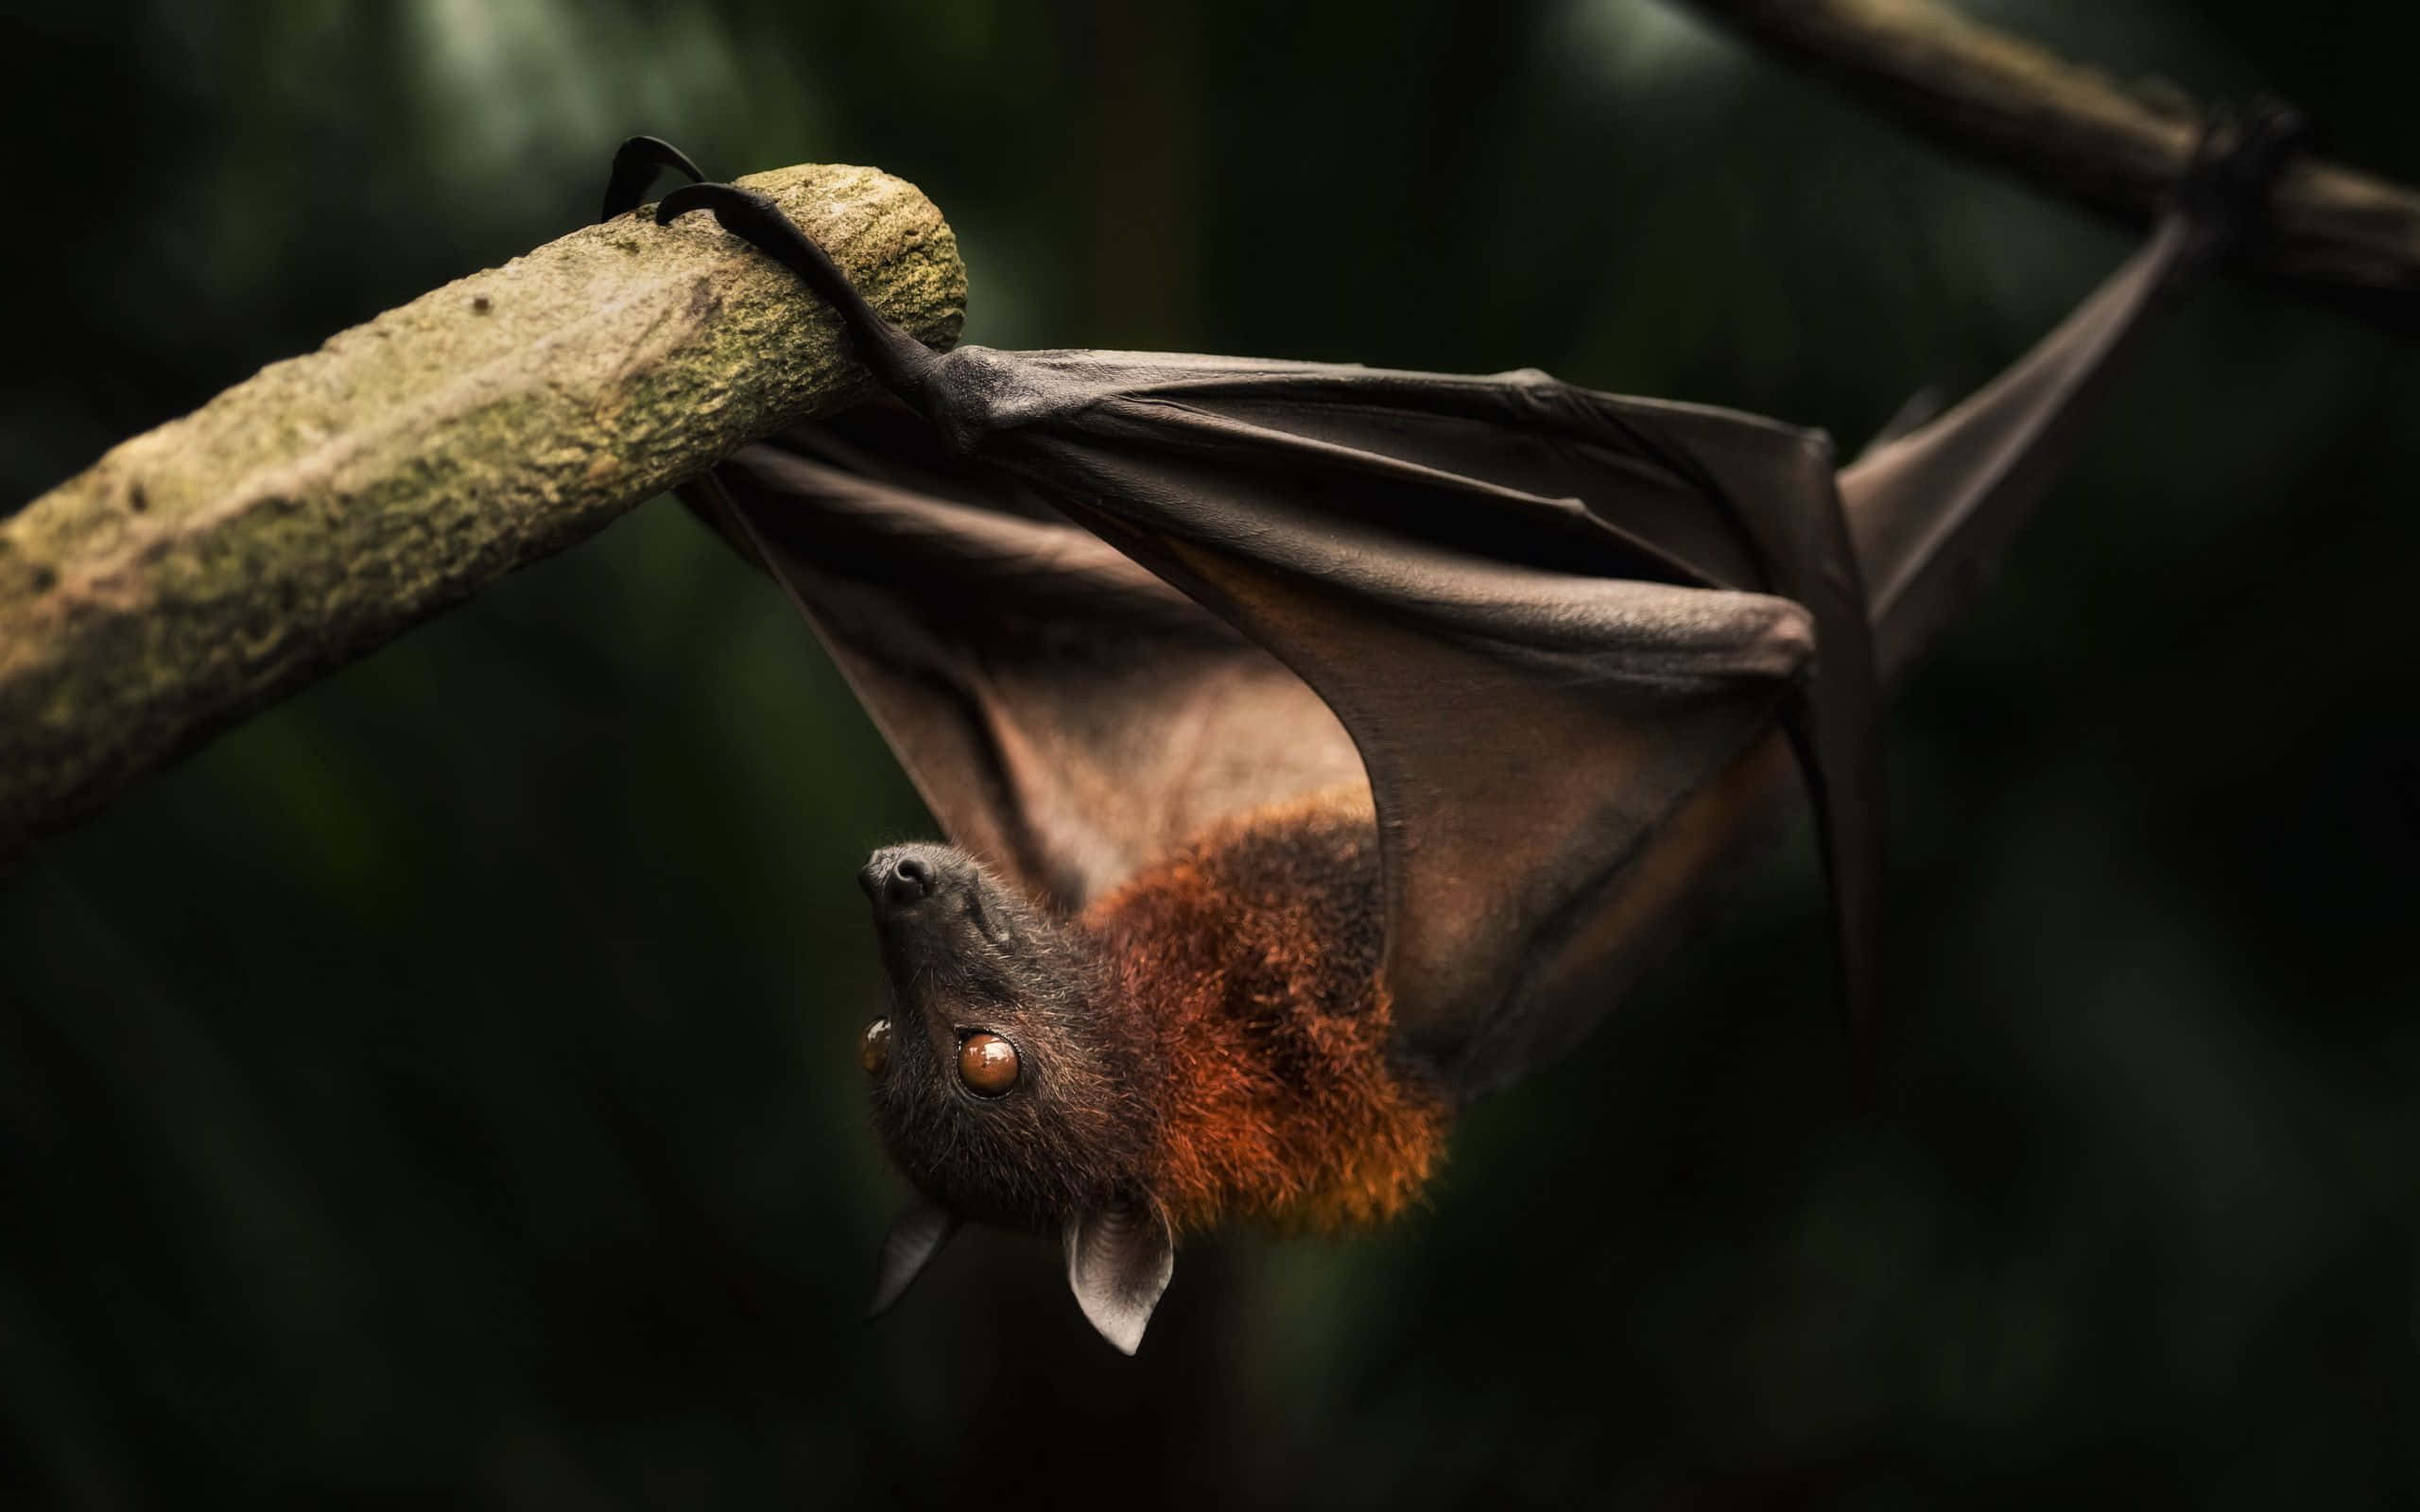 Majestic bat with a fascinating background